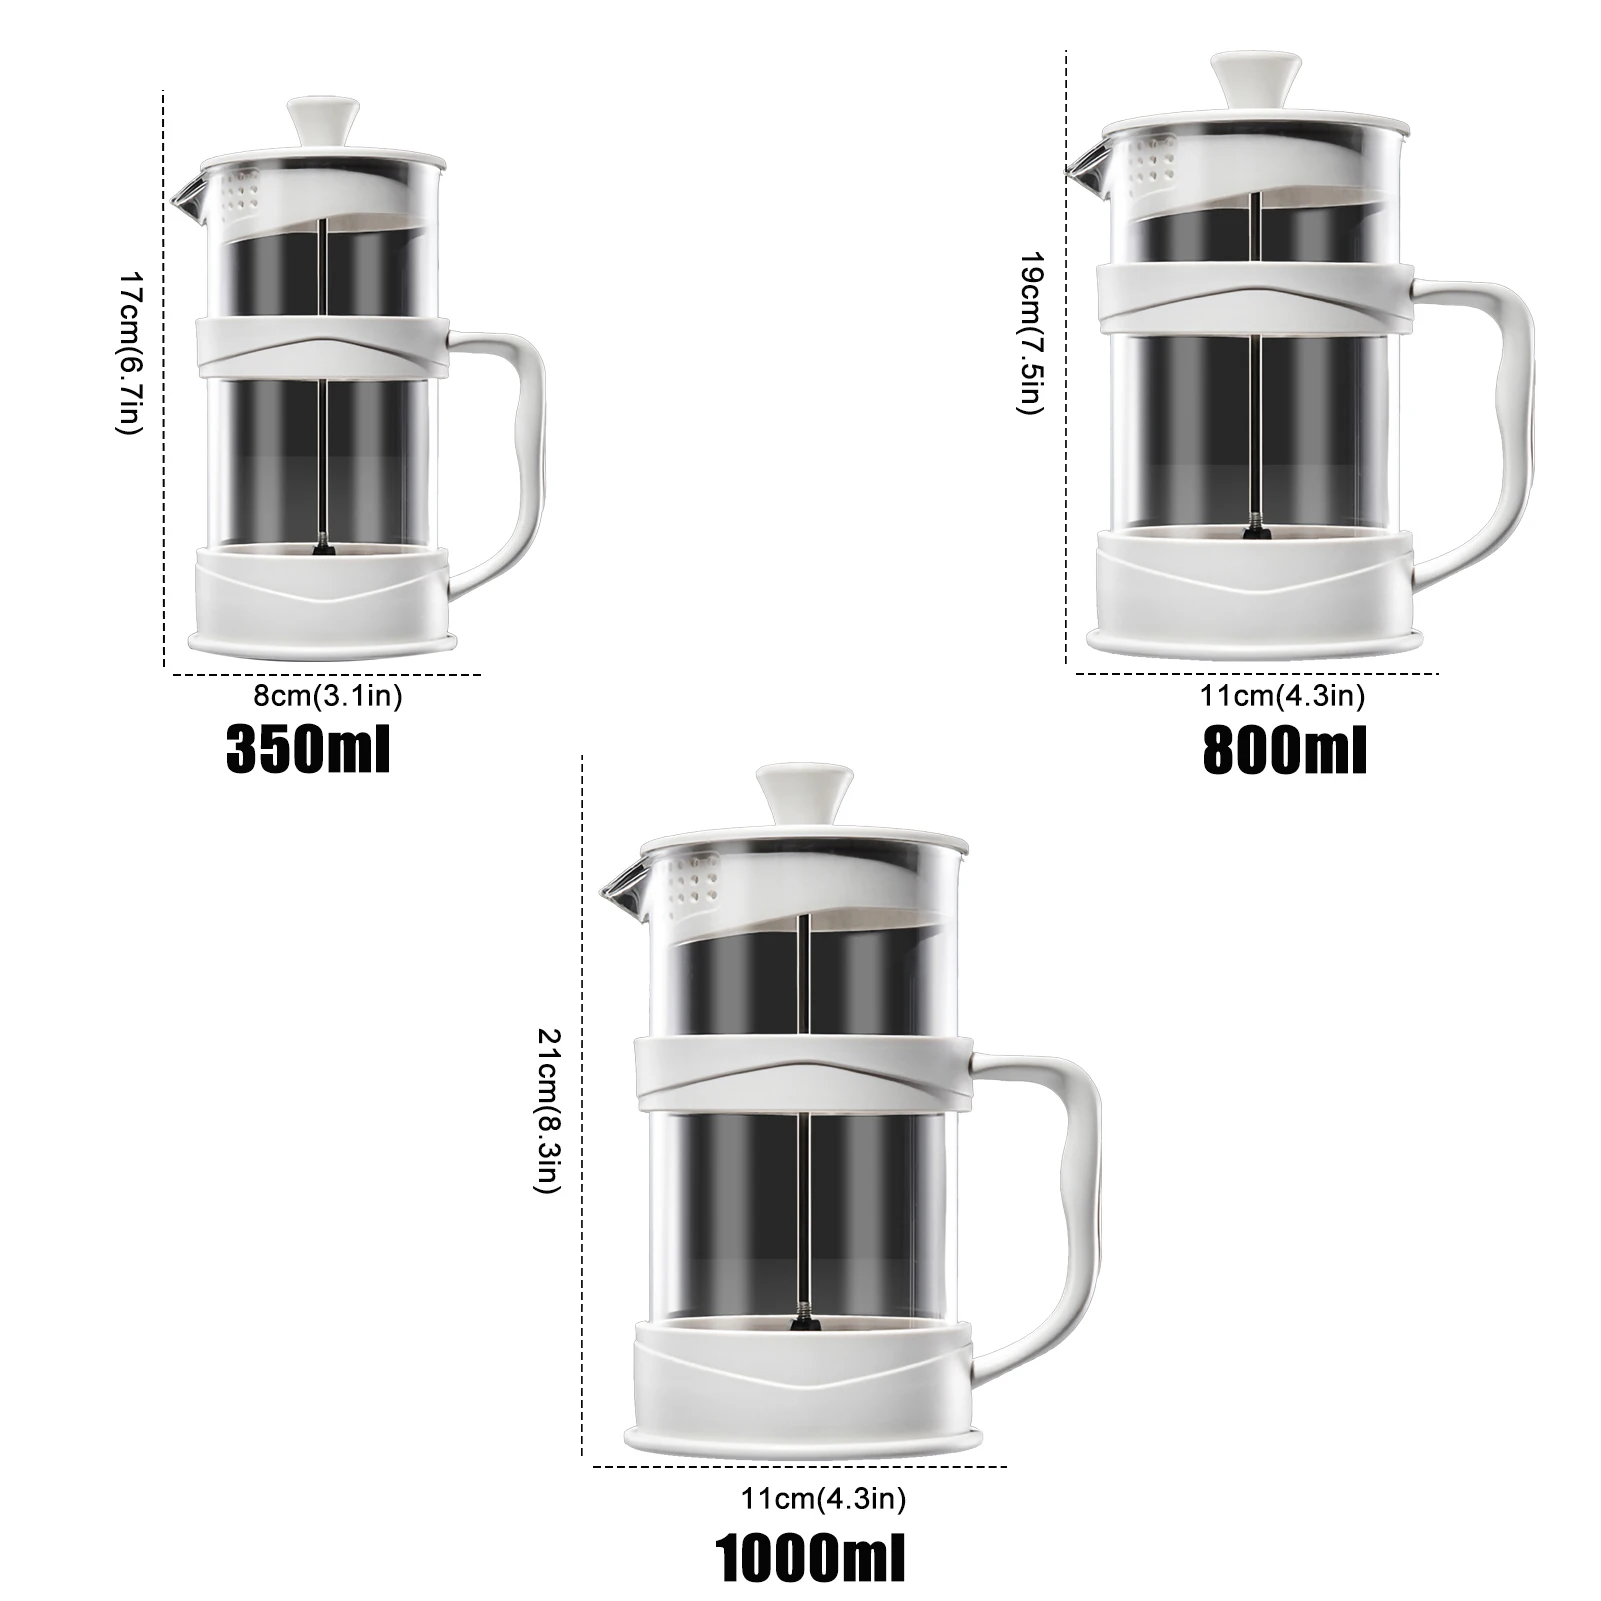 Multifunctiona French Press Coffee Maker Camping Mini Tea Press of Stainless Steel Filter and Heat Resistant Glass Coffee Maker